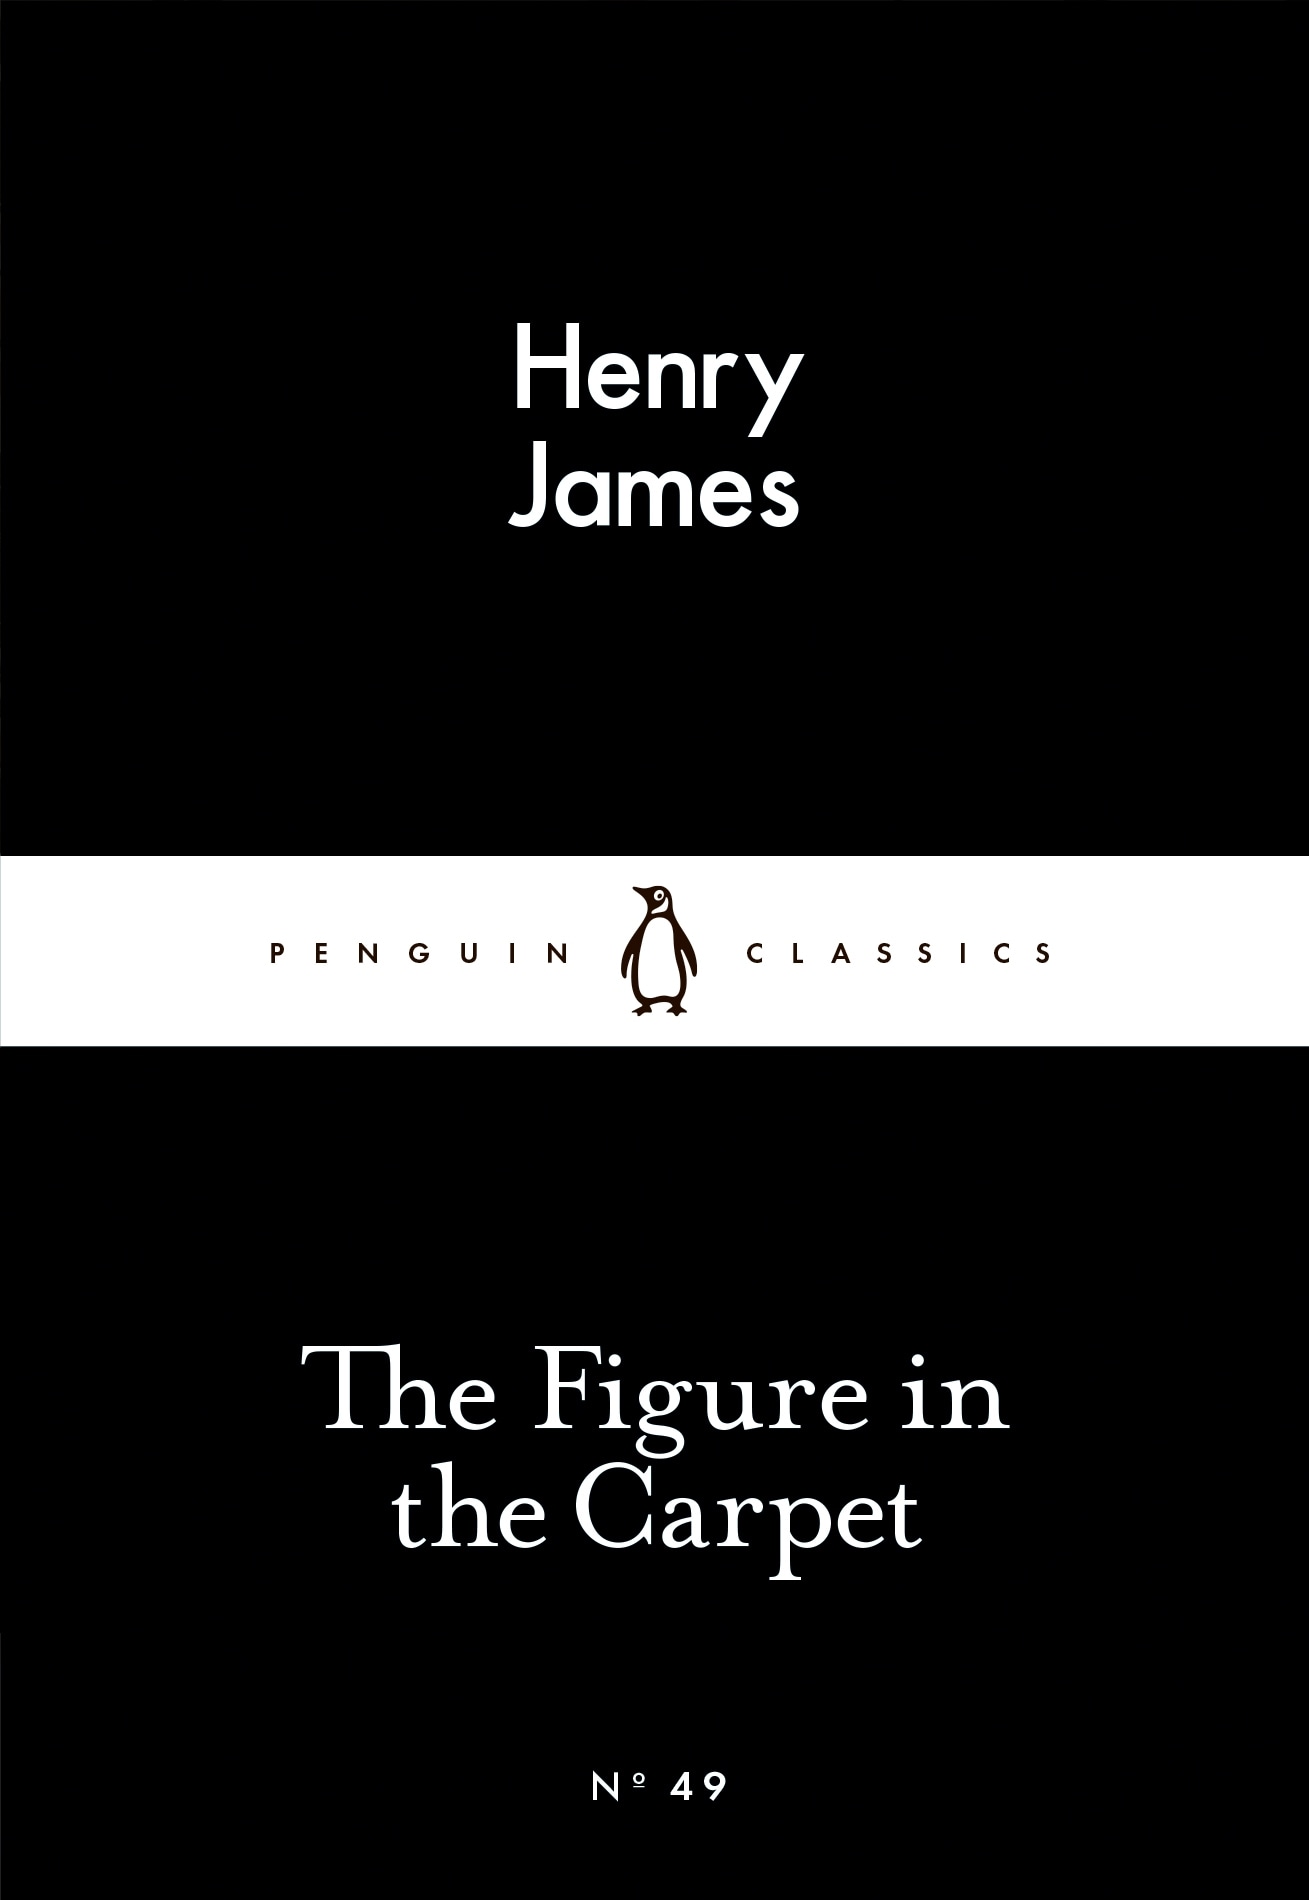 Book “The Figure in the Carpet” by Henry James — February 26, 2015